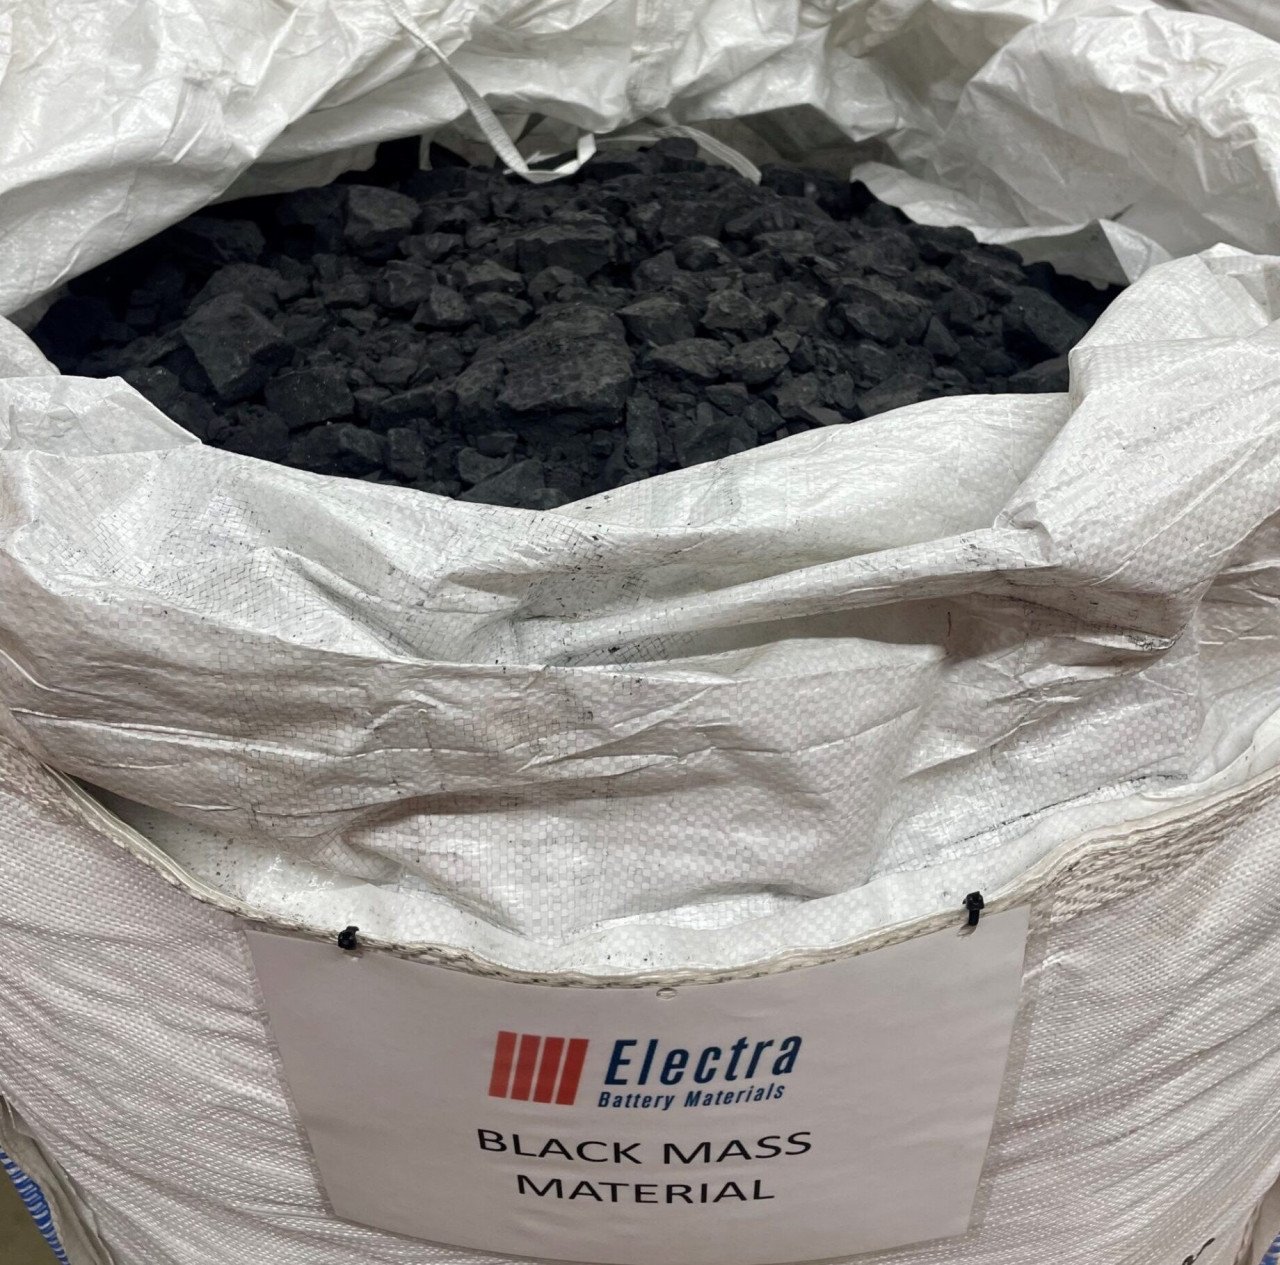 Electra recovers Lithium from Battery Recycling trial, claims improved economics